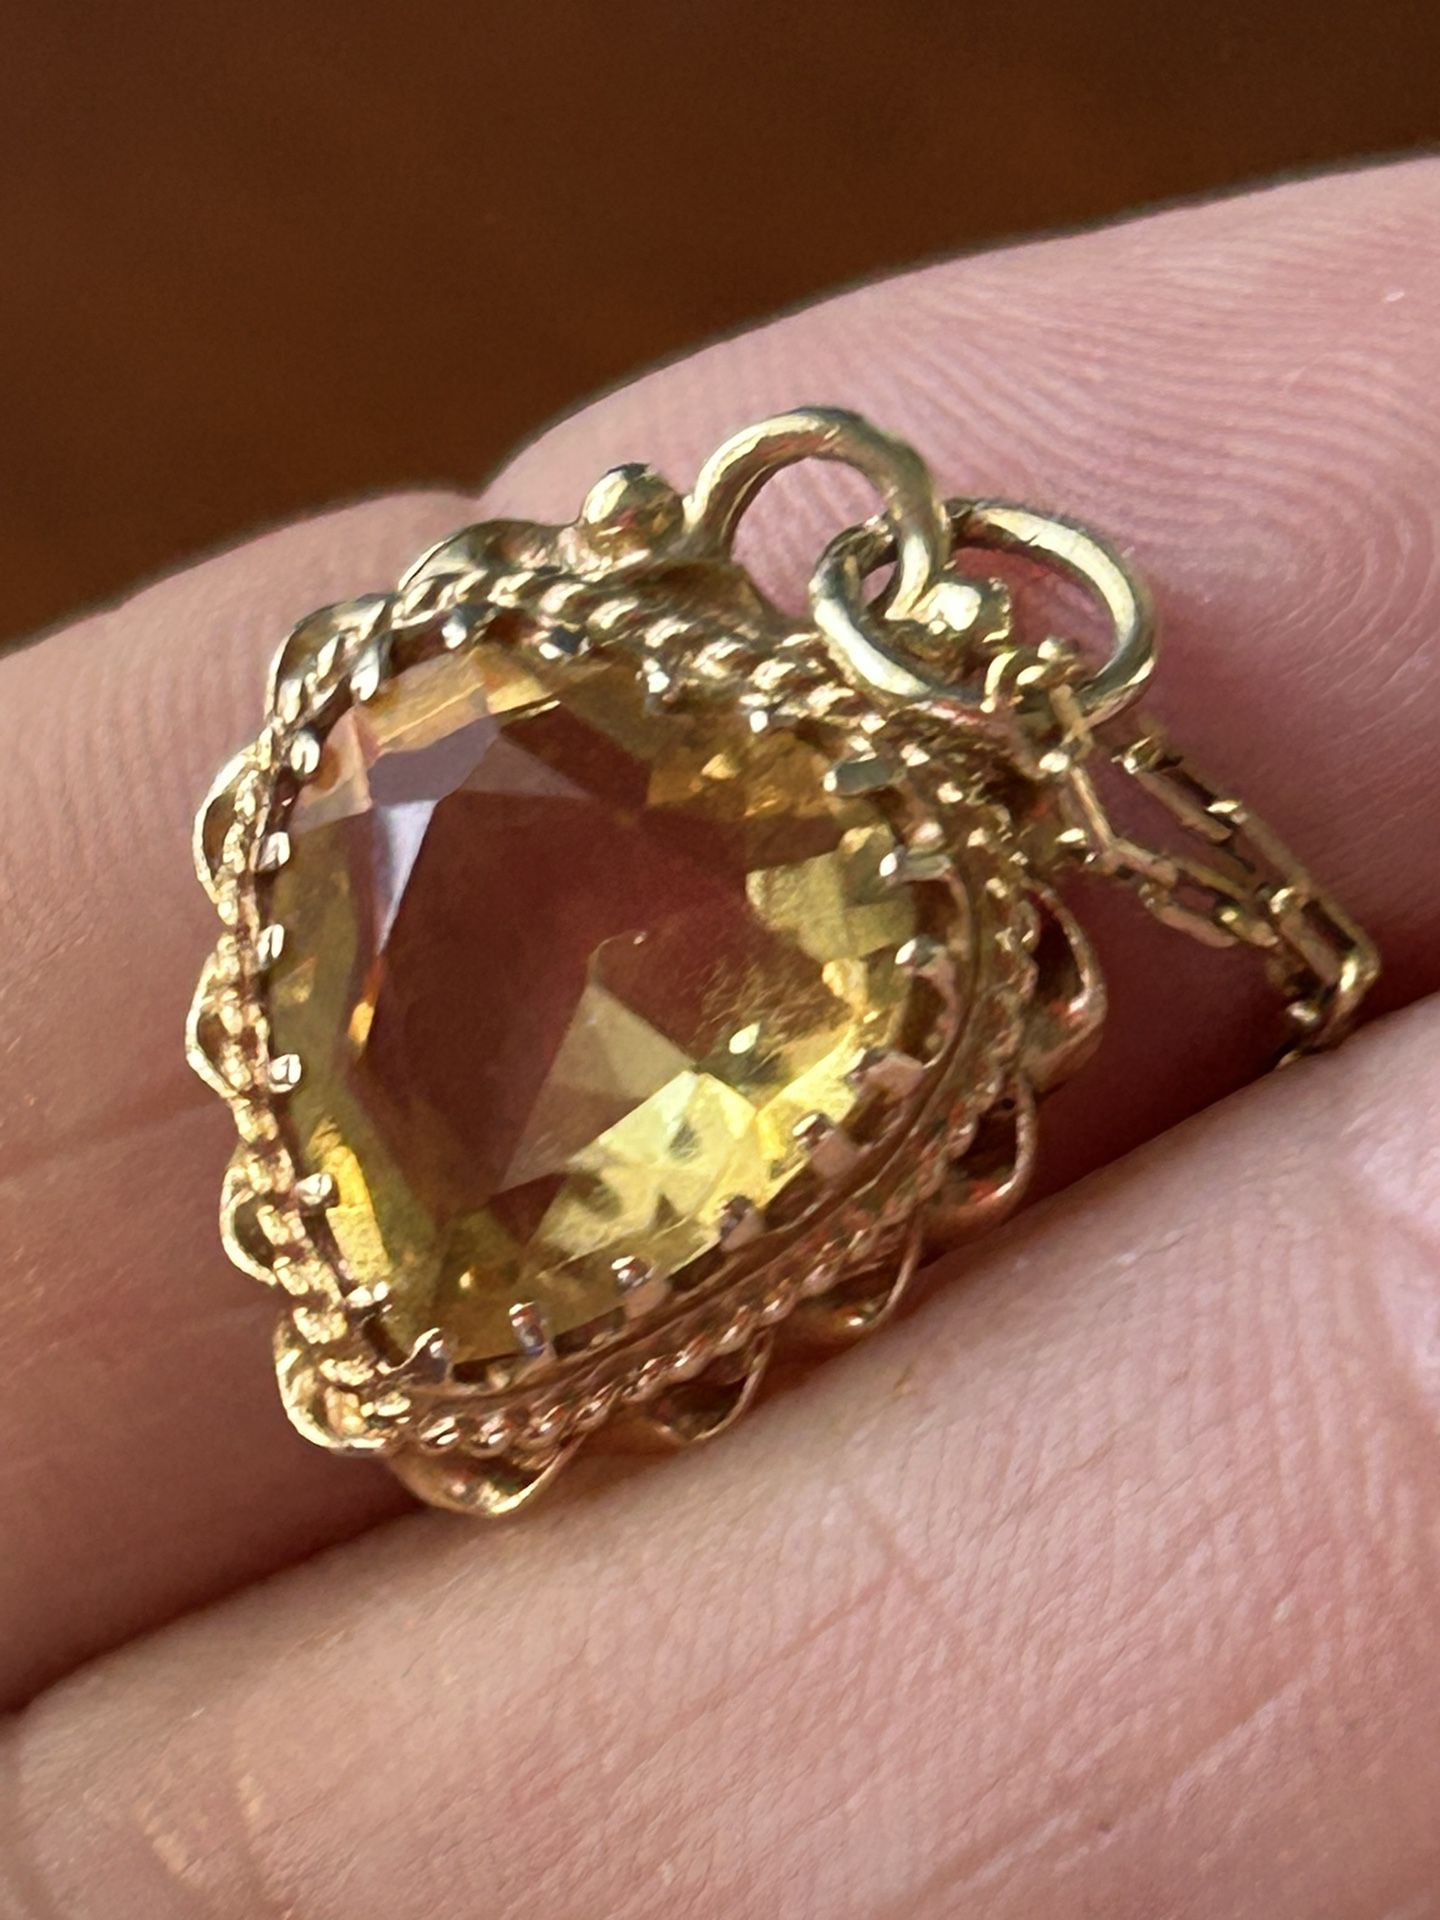 Antique Yellow Topaz 14k Gold Heart Necklace 